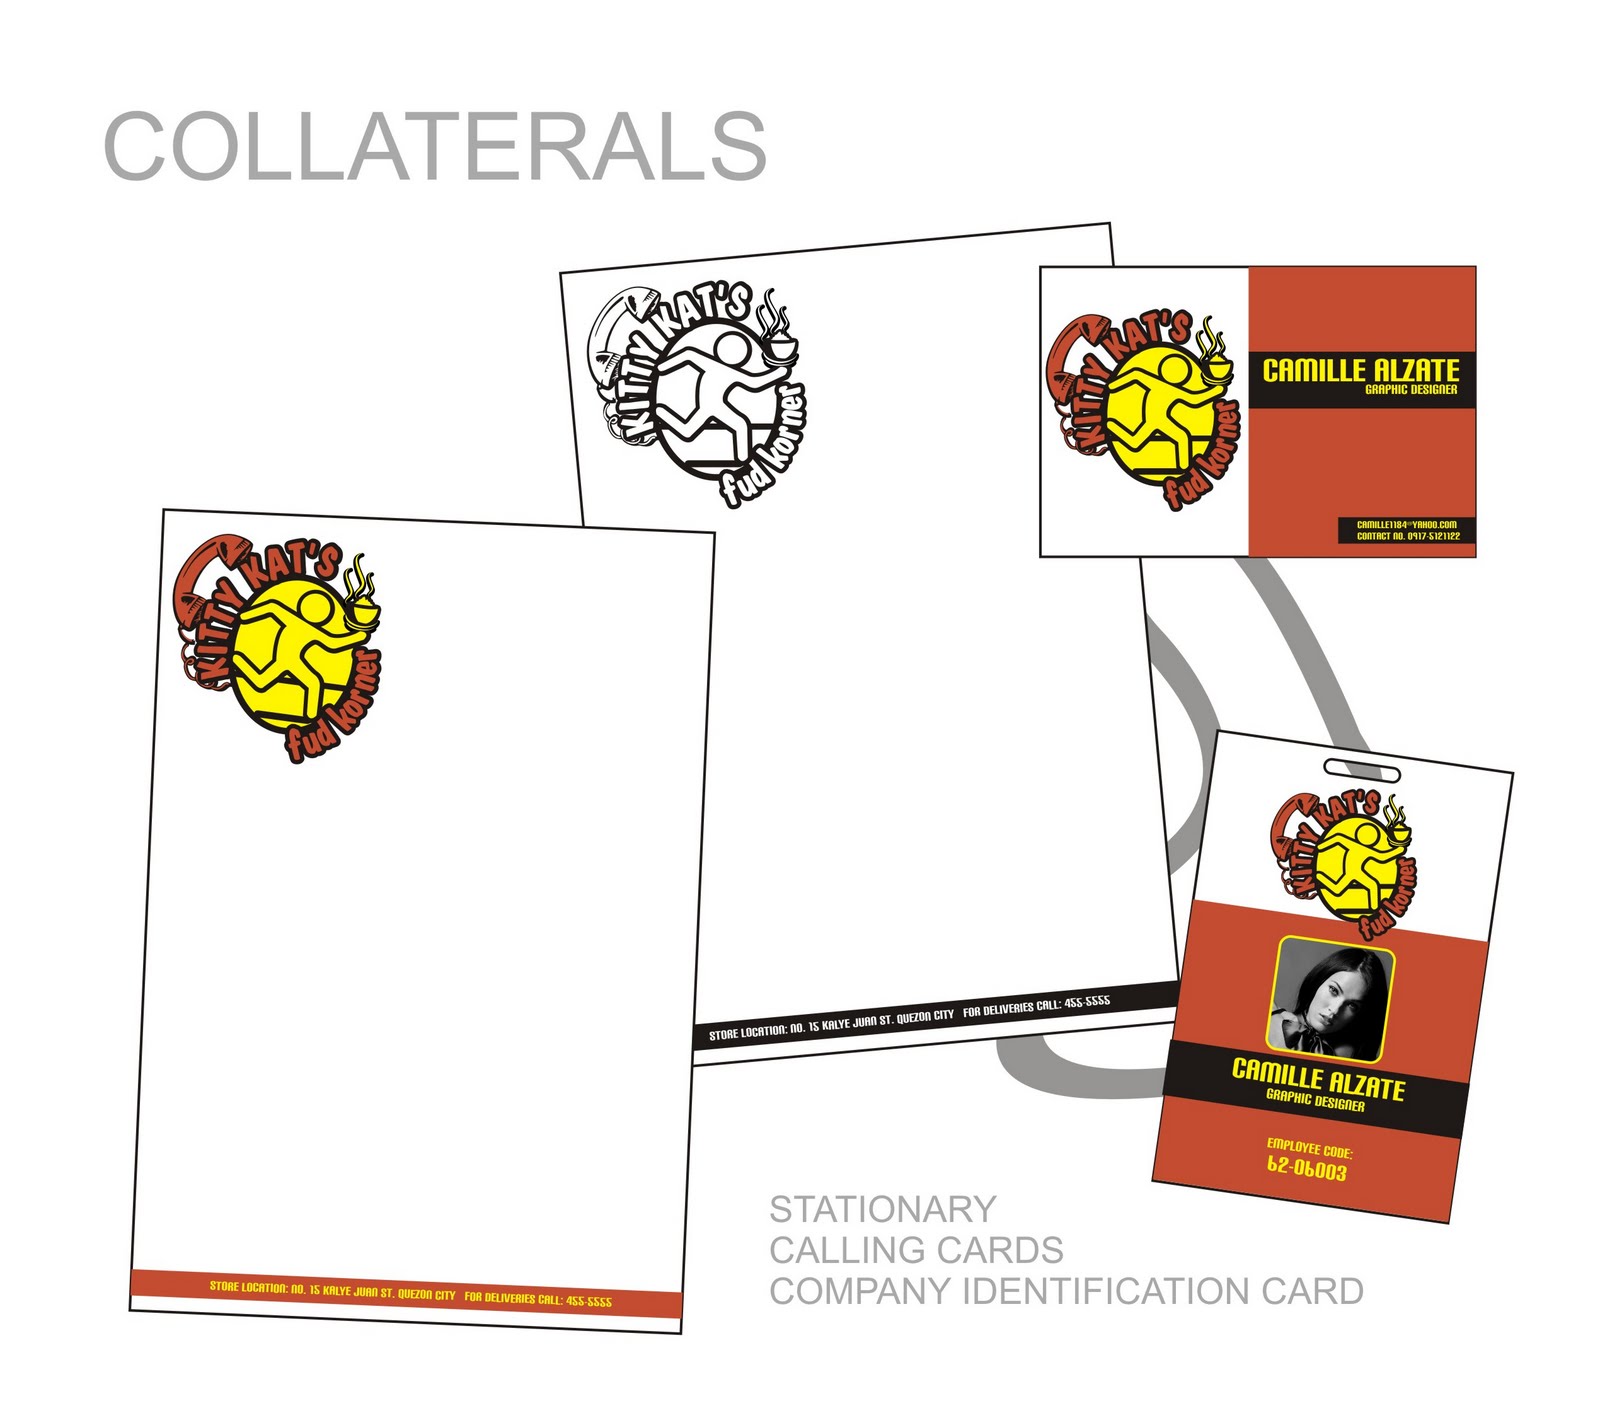 underneathMYglasses BUSINESS LOGO & COLLATERALS